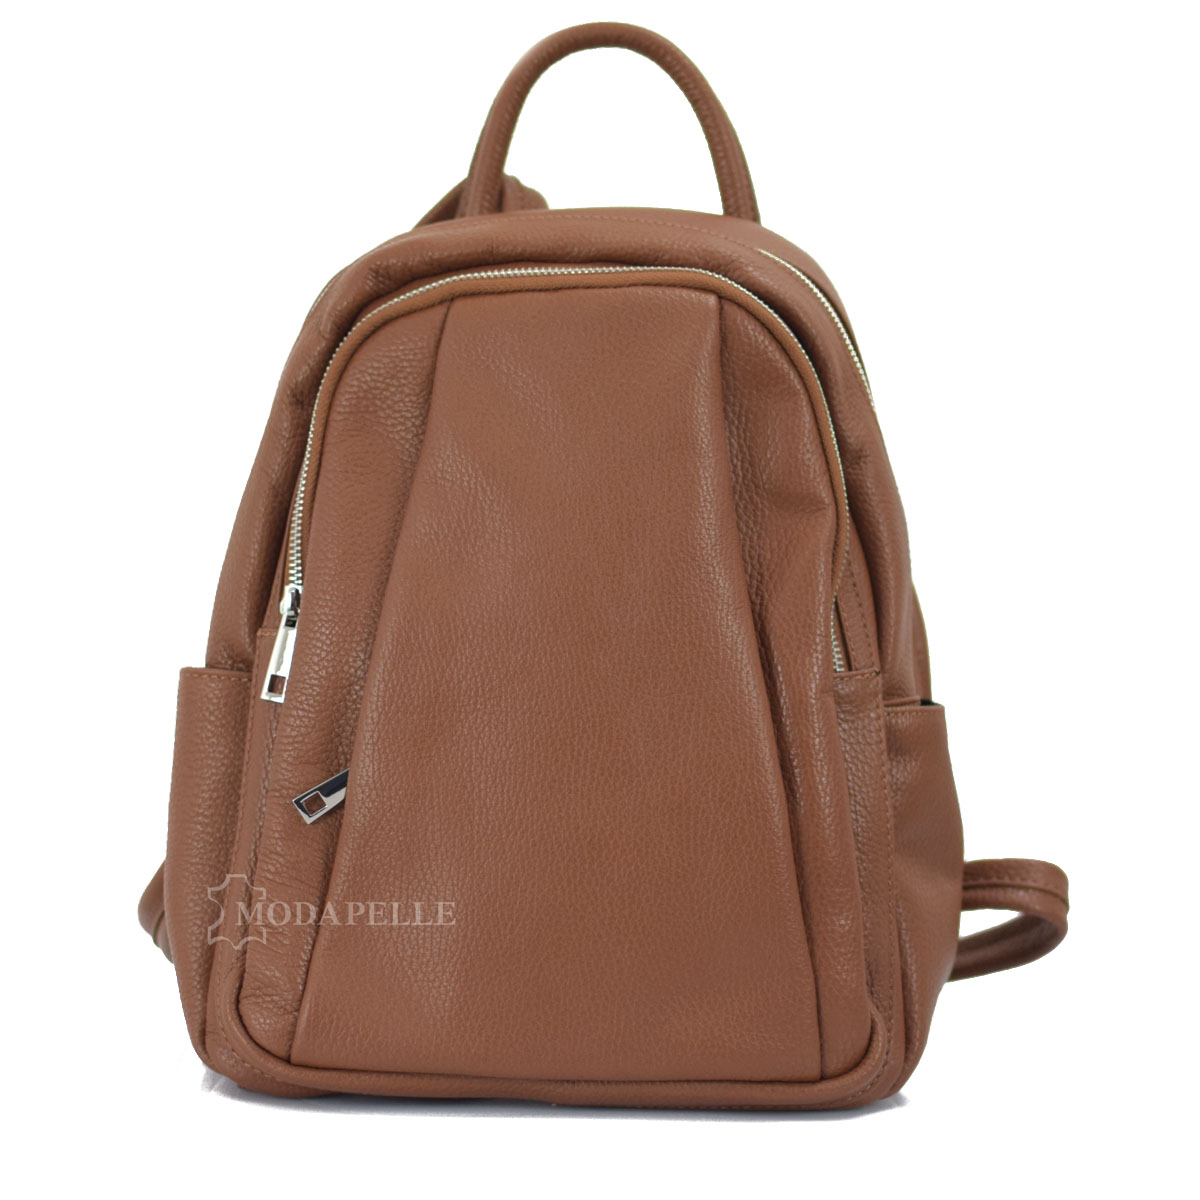 Leather backpack mp 2007 tan